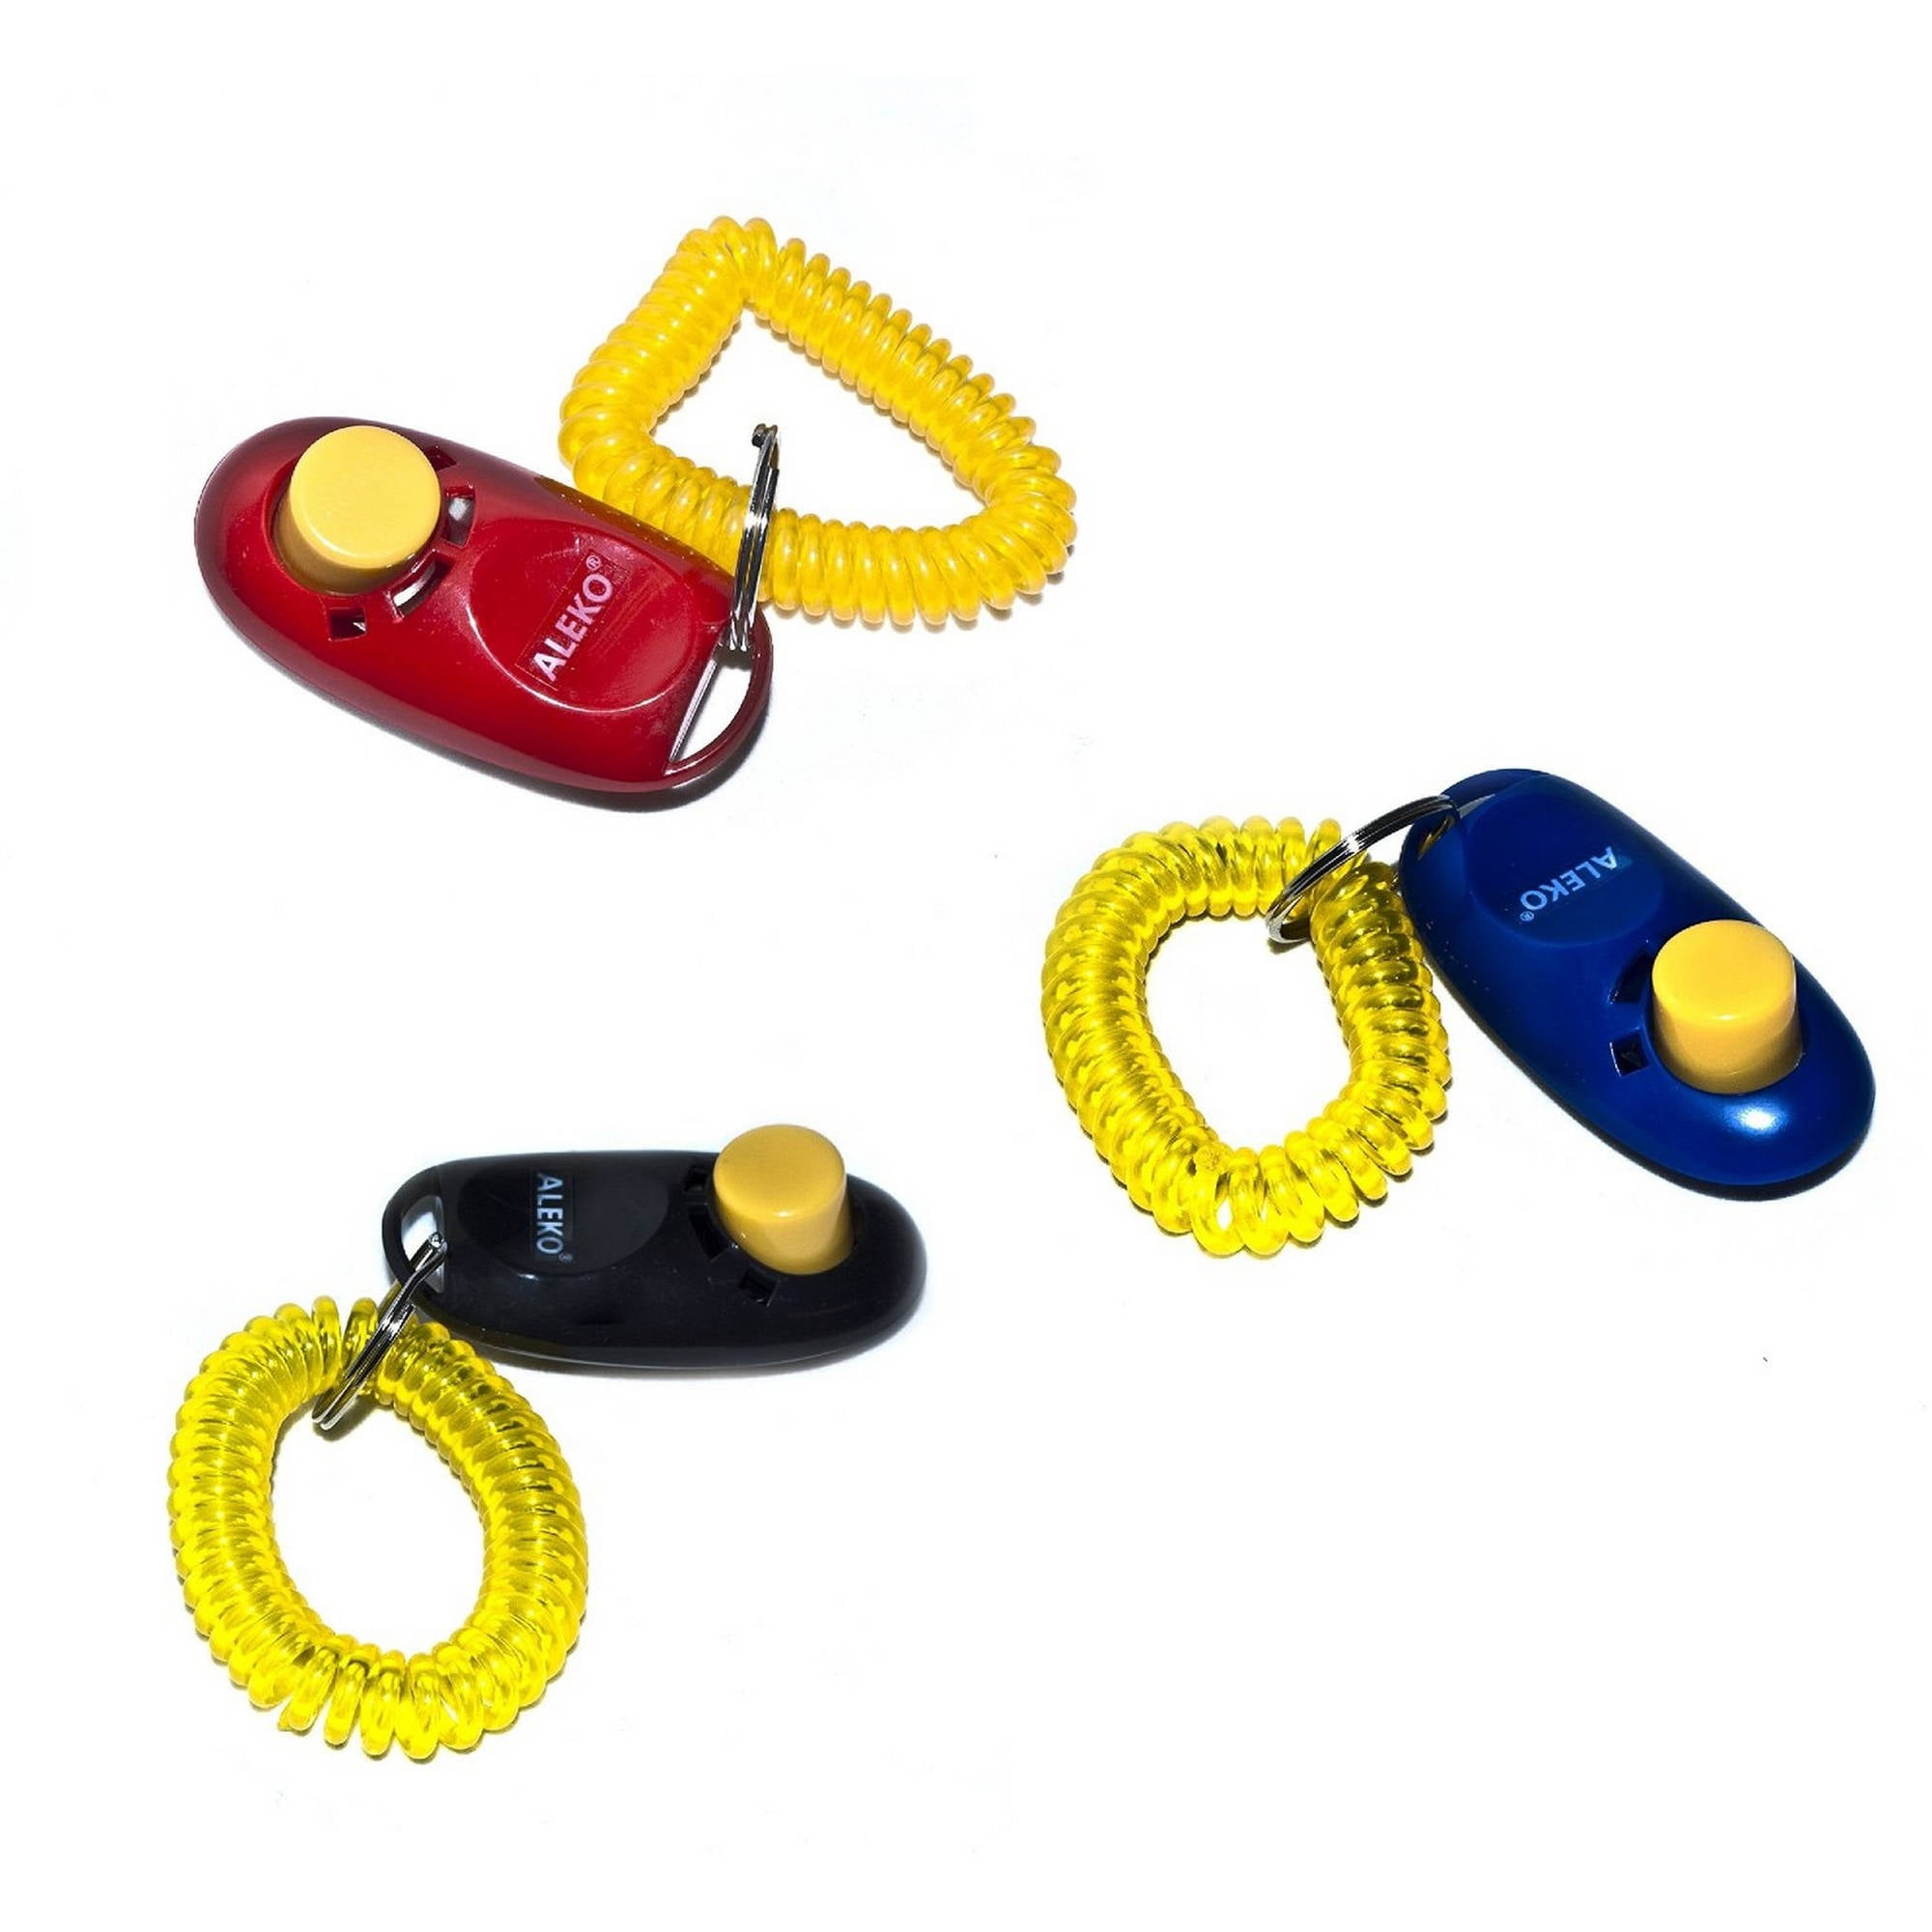 3ts-bc16-unb Dog Training Clicker, Multicolor - Pack Of 3